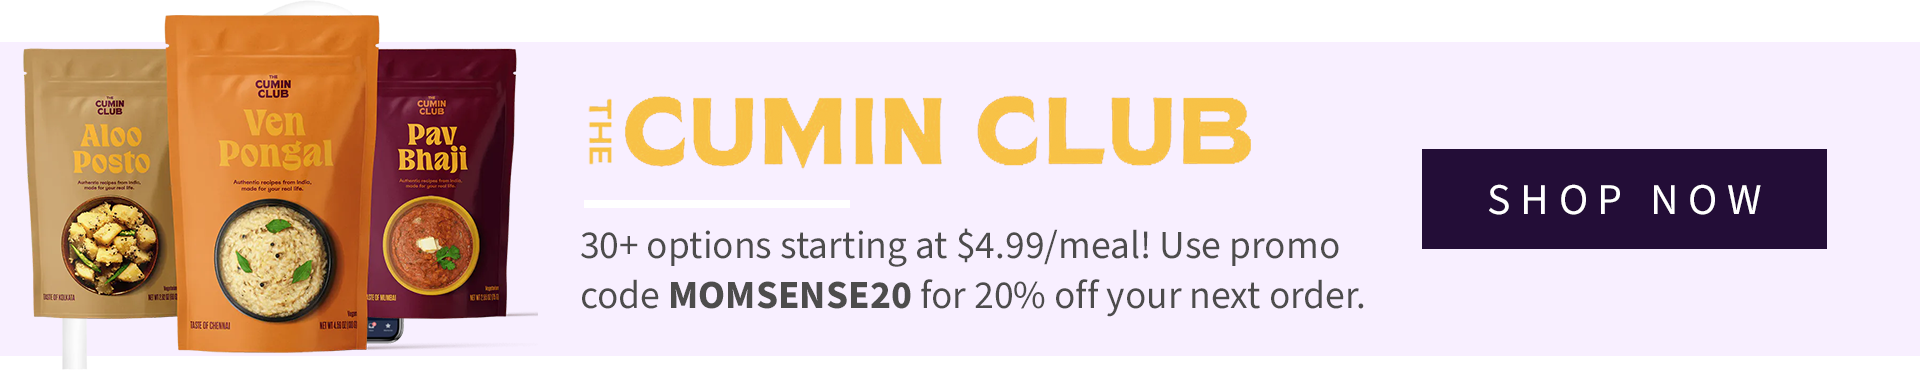 30+ options starting at $4.99/meal! Use promo code MOMSENSE20 for 20% off your next order.